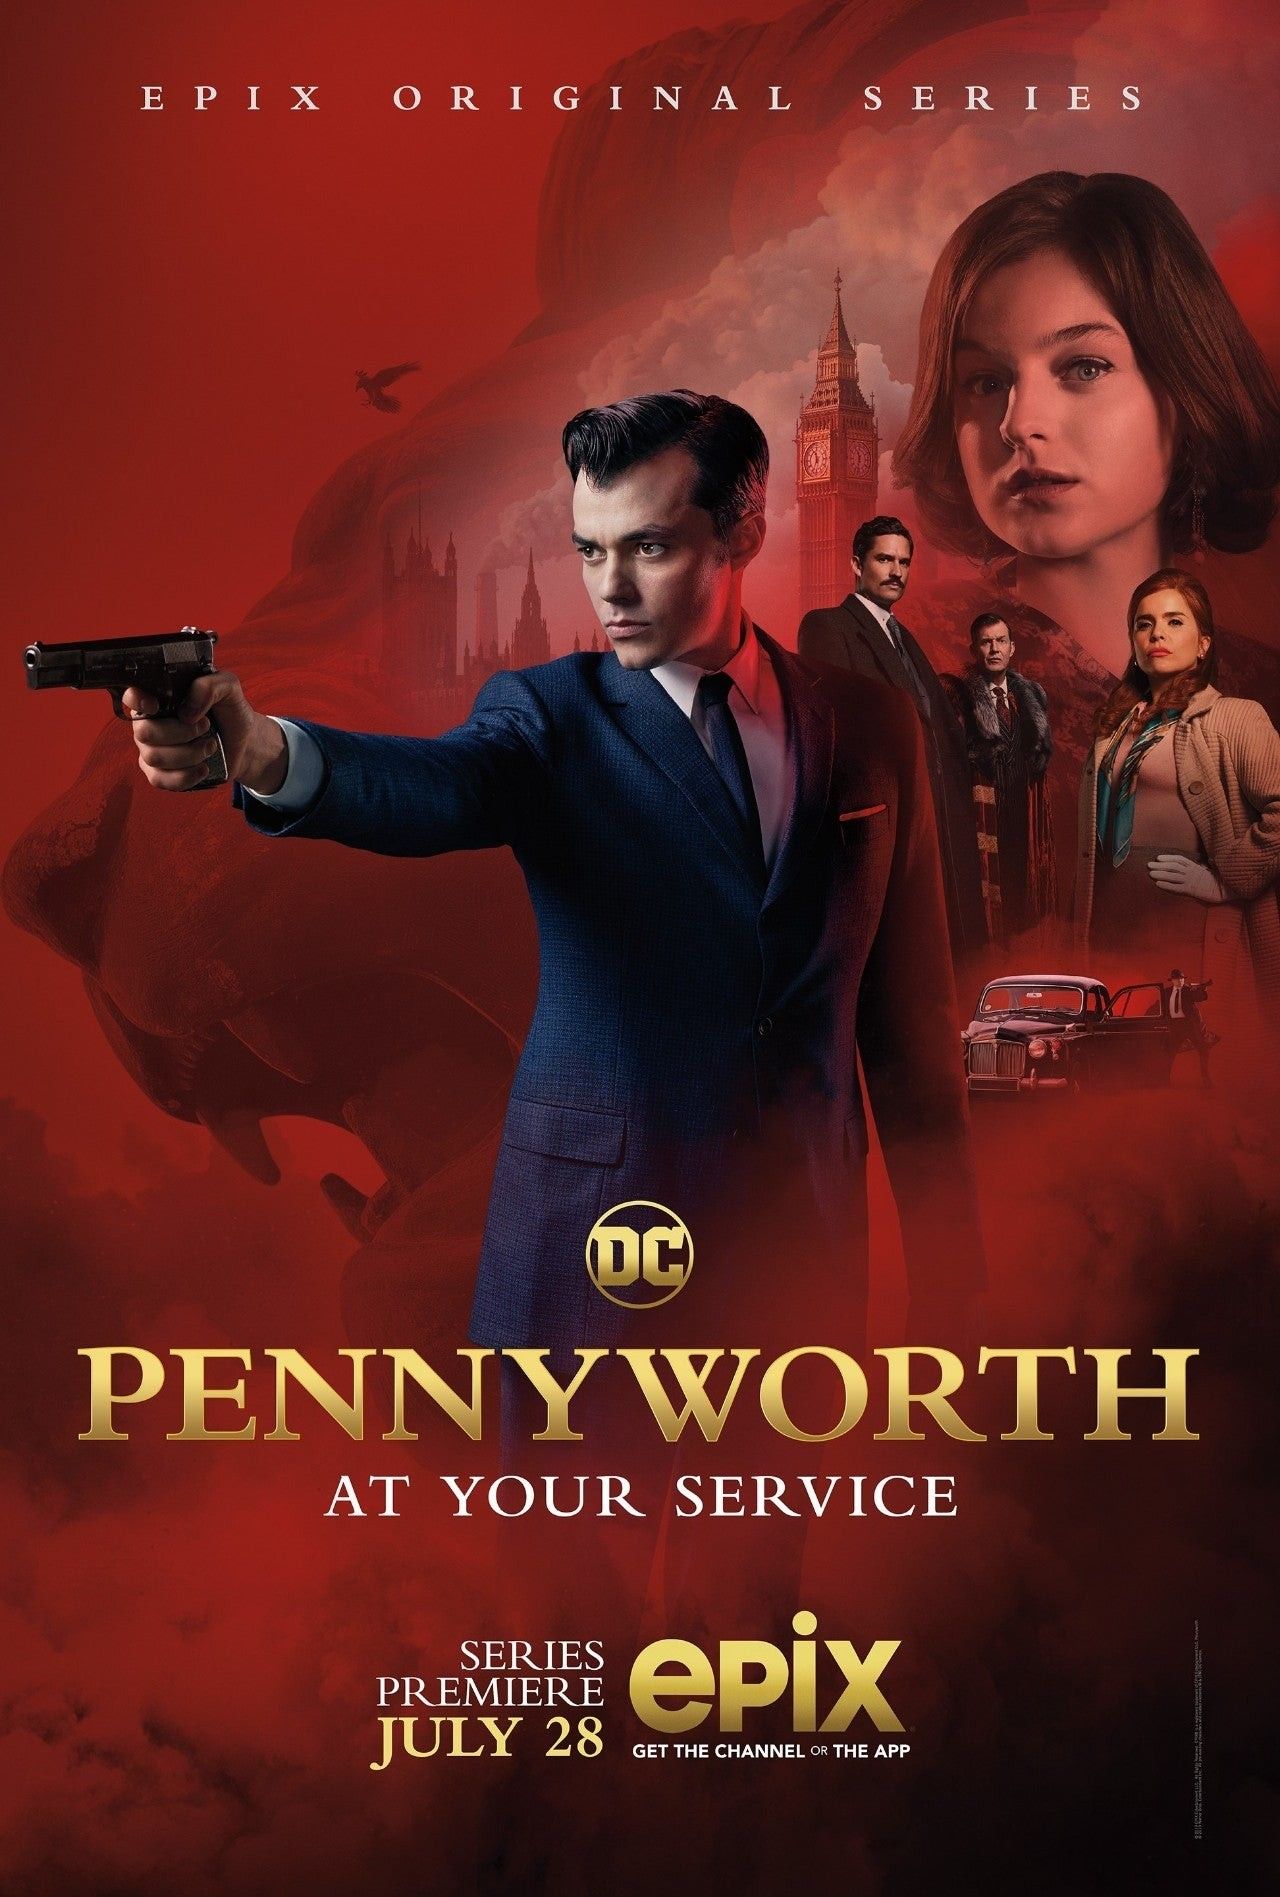 Pennyworth TV show poster